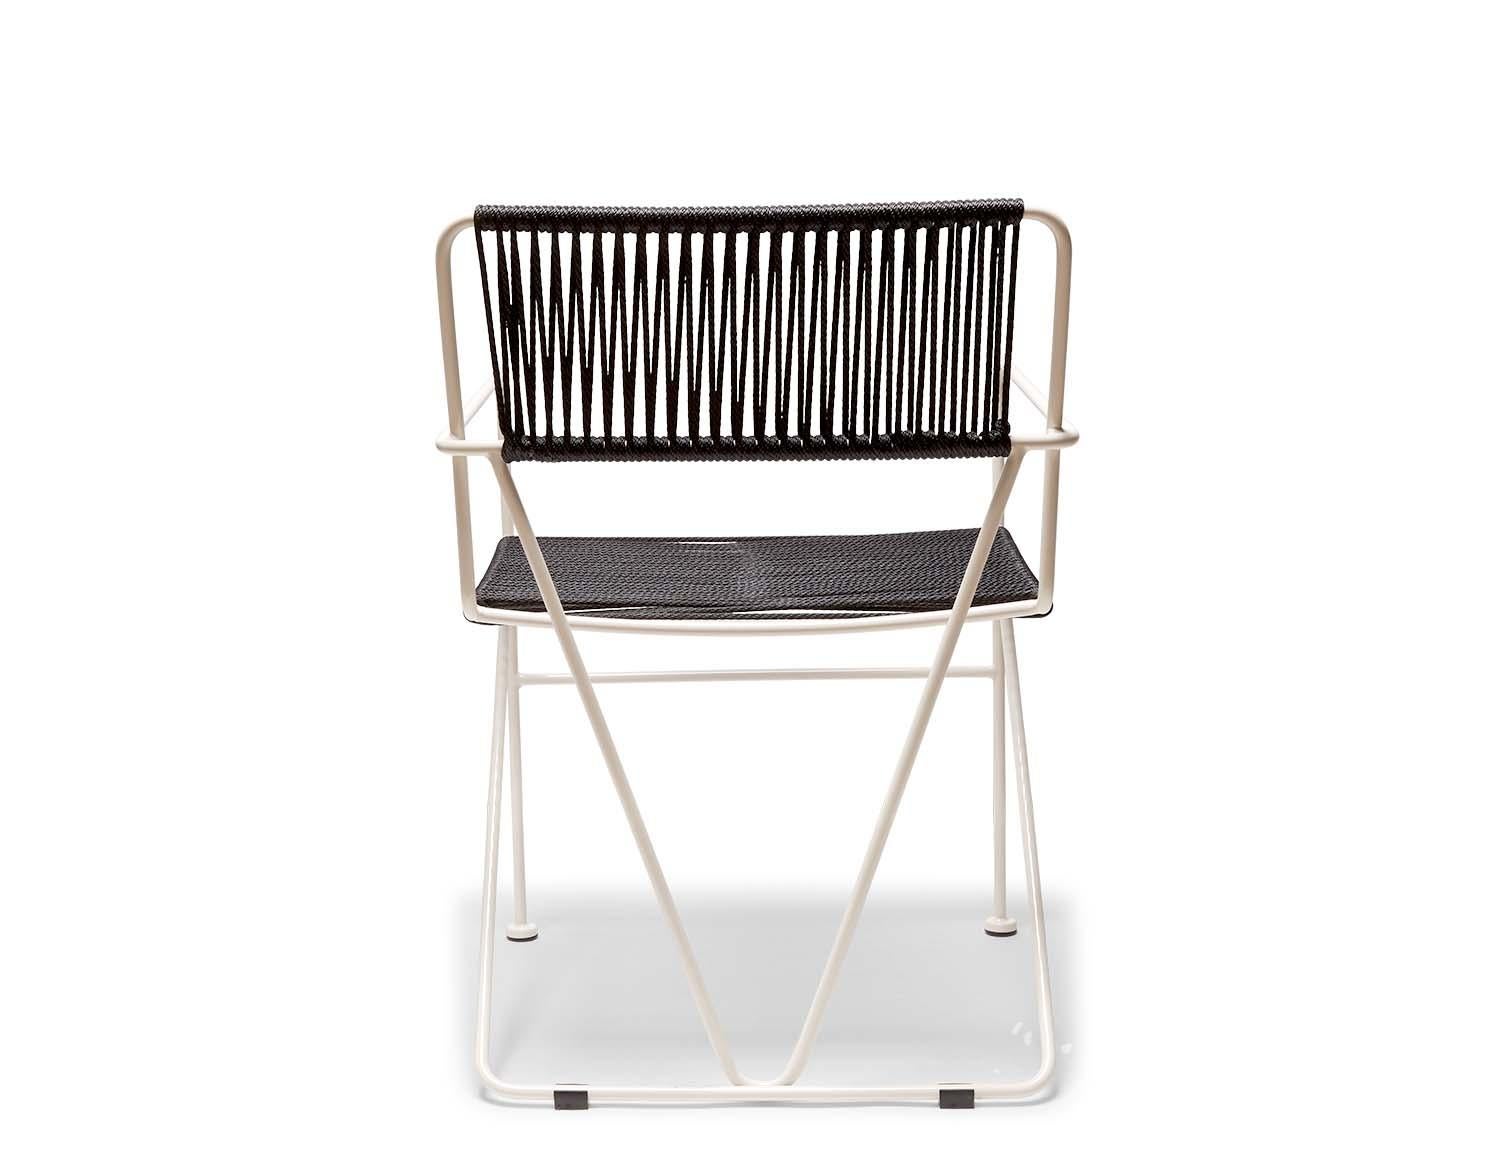 American Outdoor Corded Hinterland Dining Chair by Lawson-Fenning